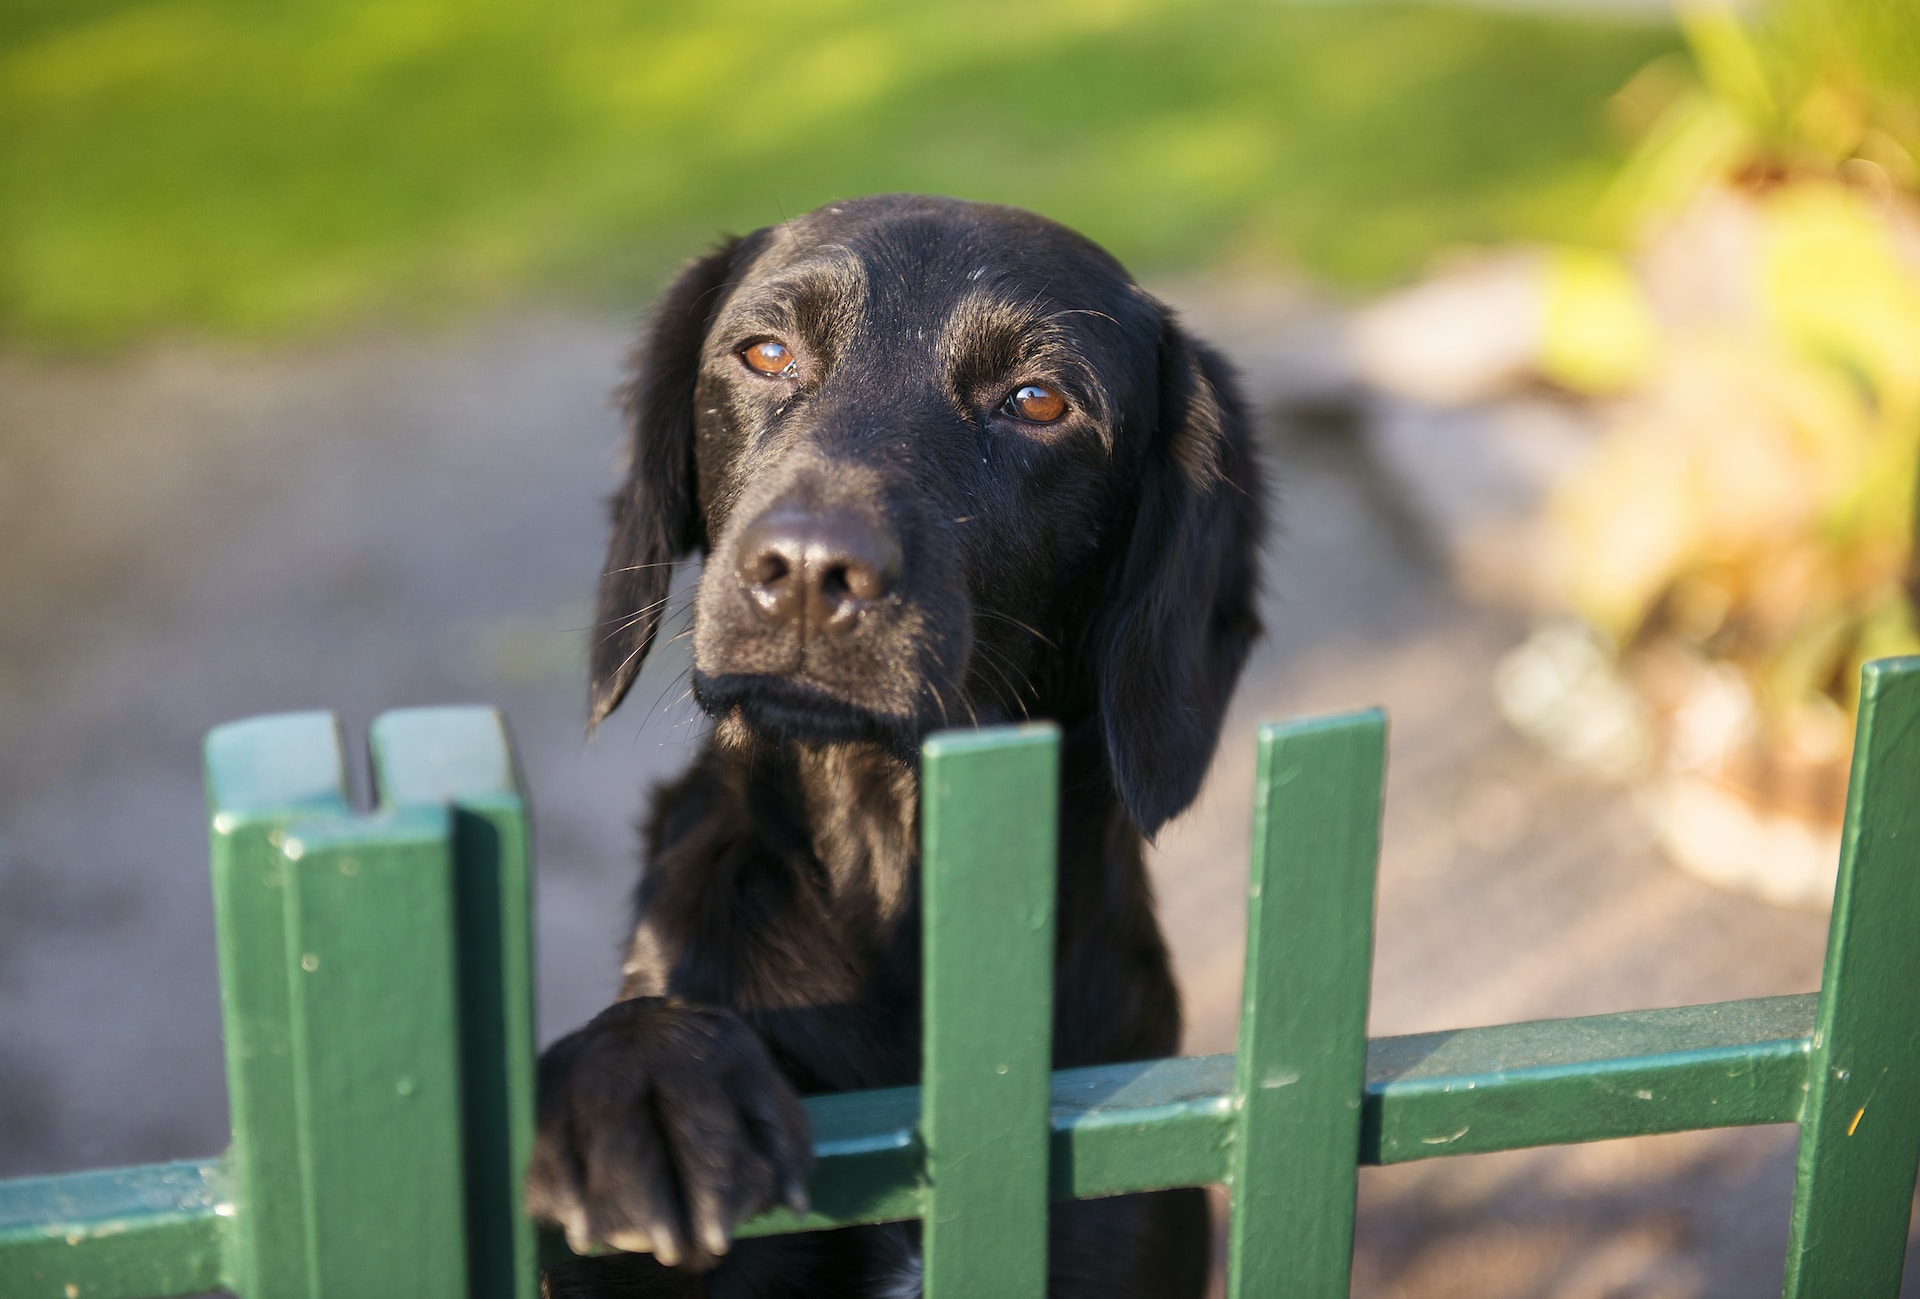 A black dog looking over a green fence